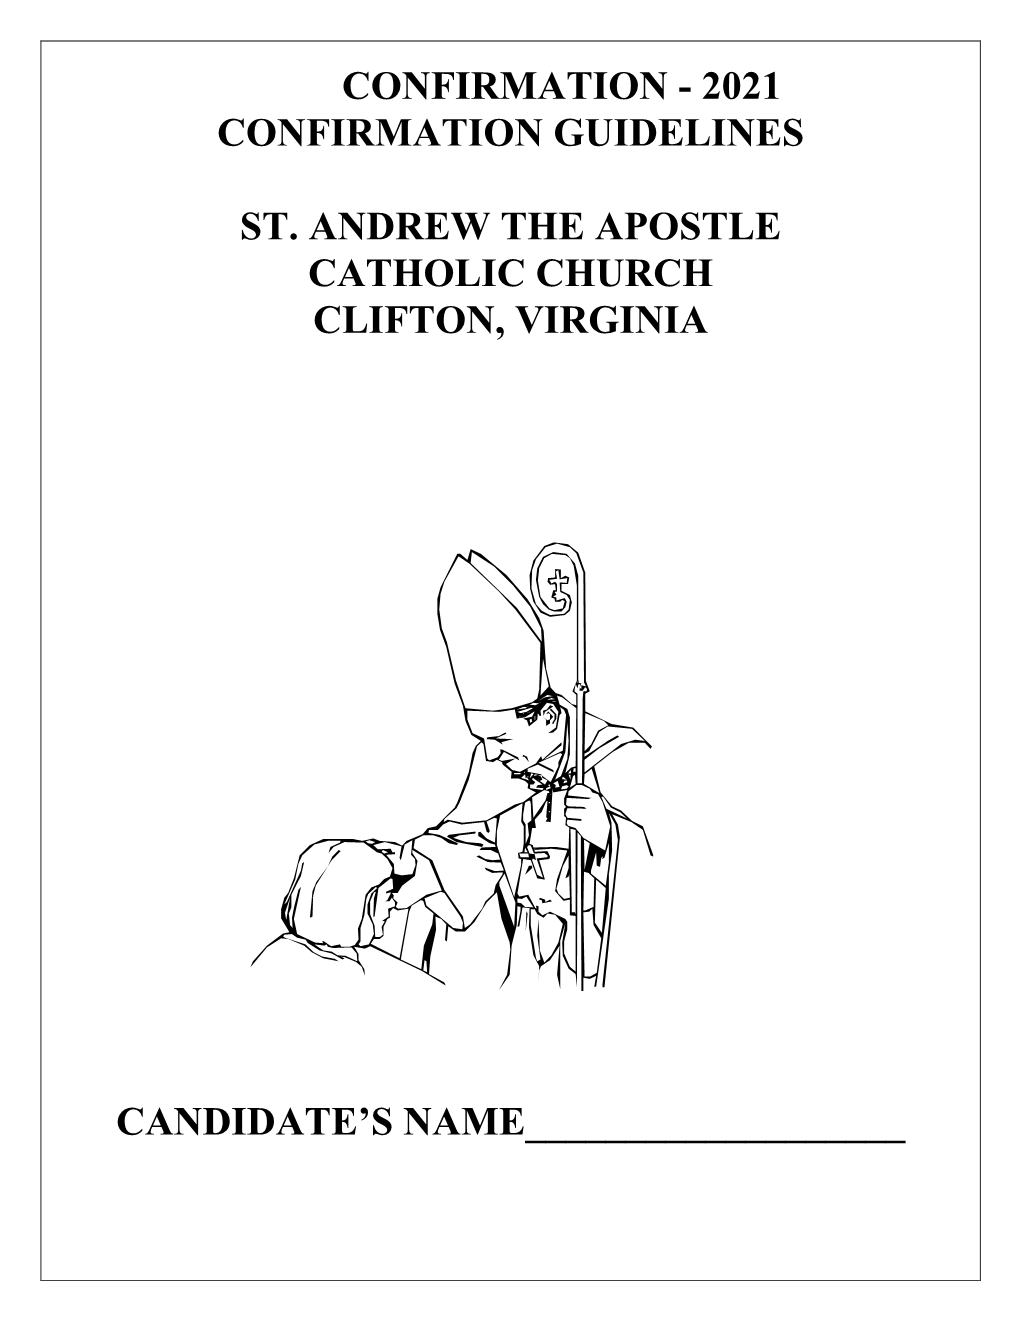 2021 Confirmation Guidelines St. Andrew the Apostle Catholic Church